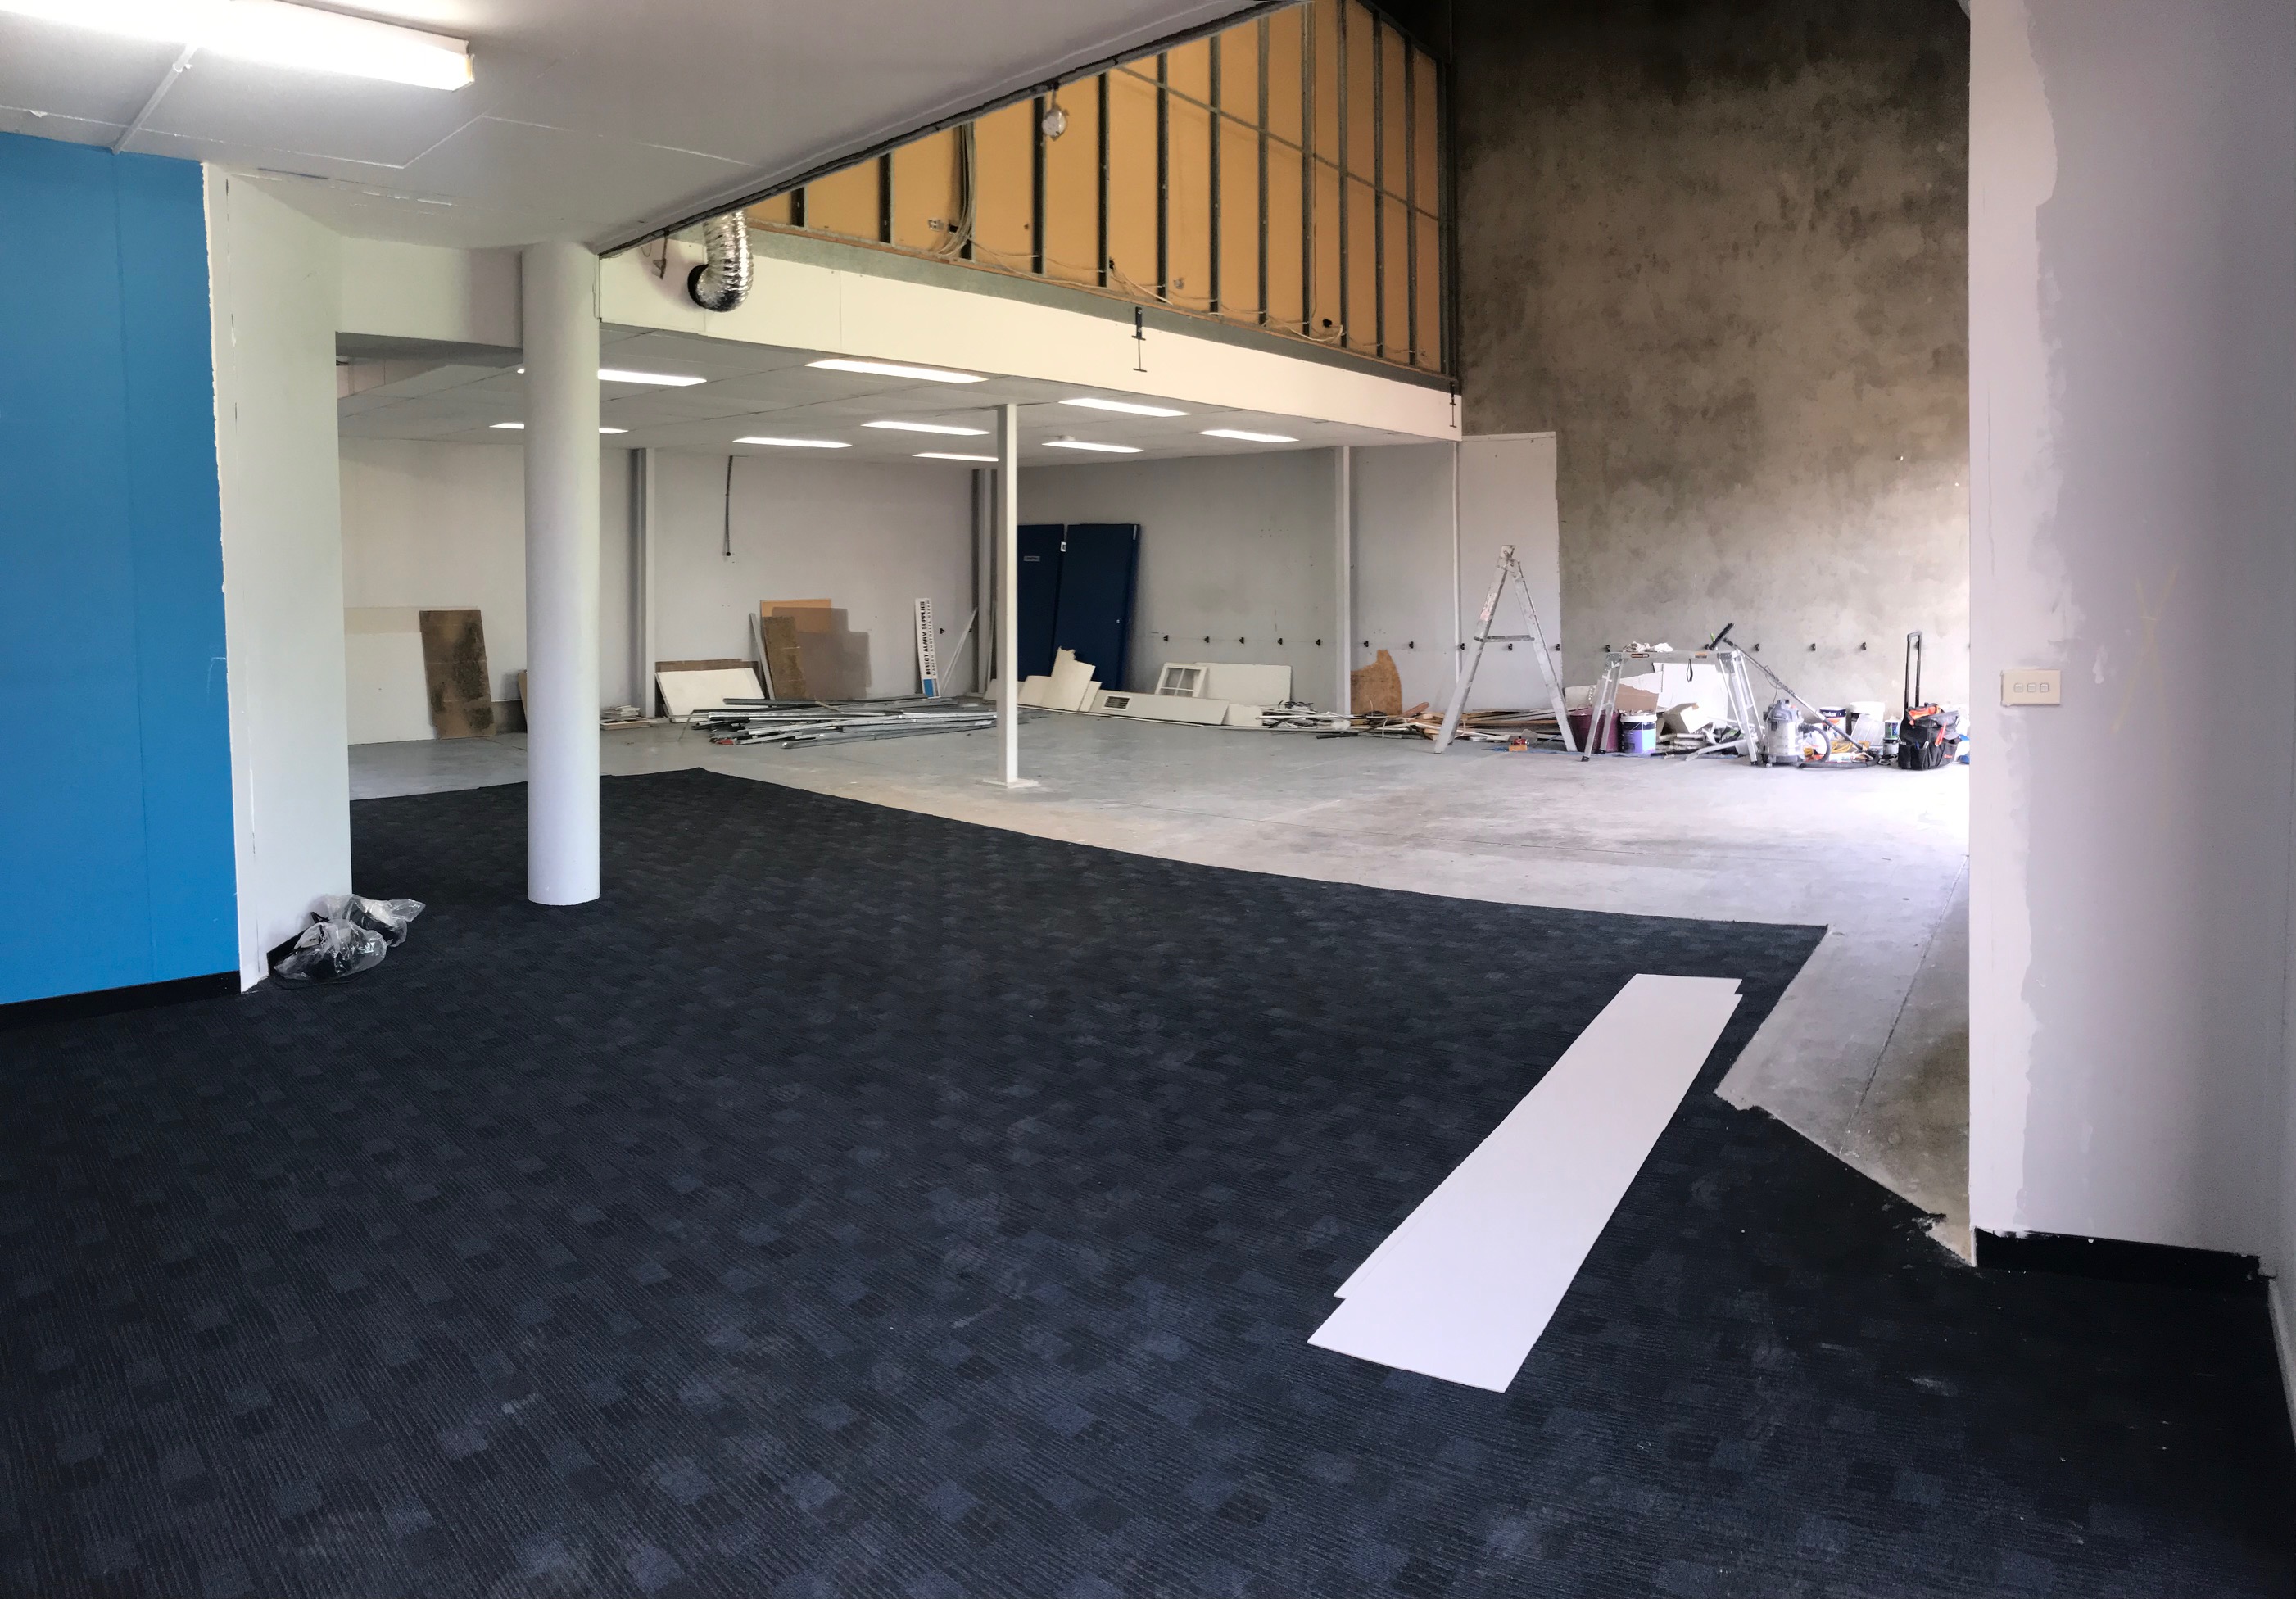 Industrial property for lease in silverwater 4